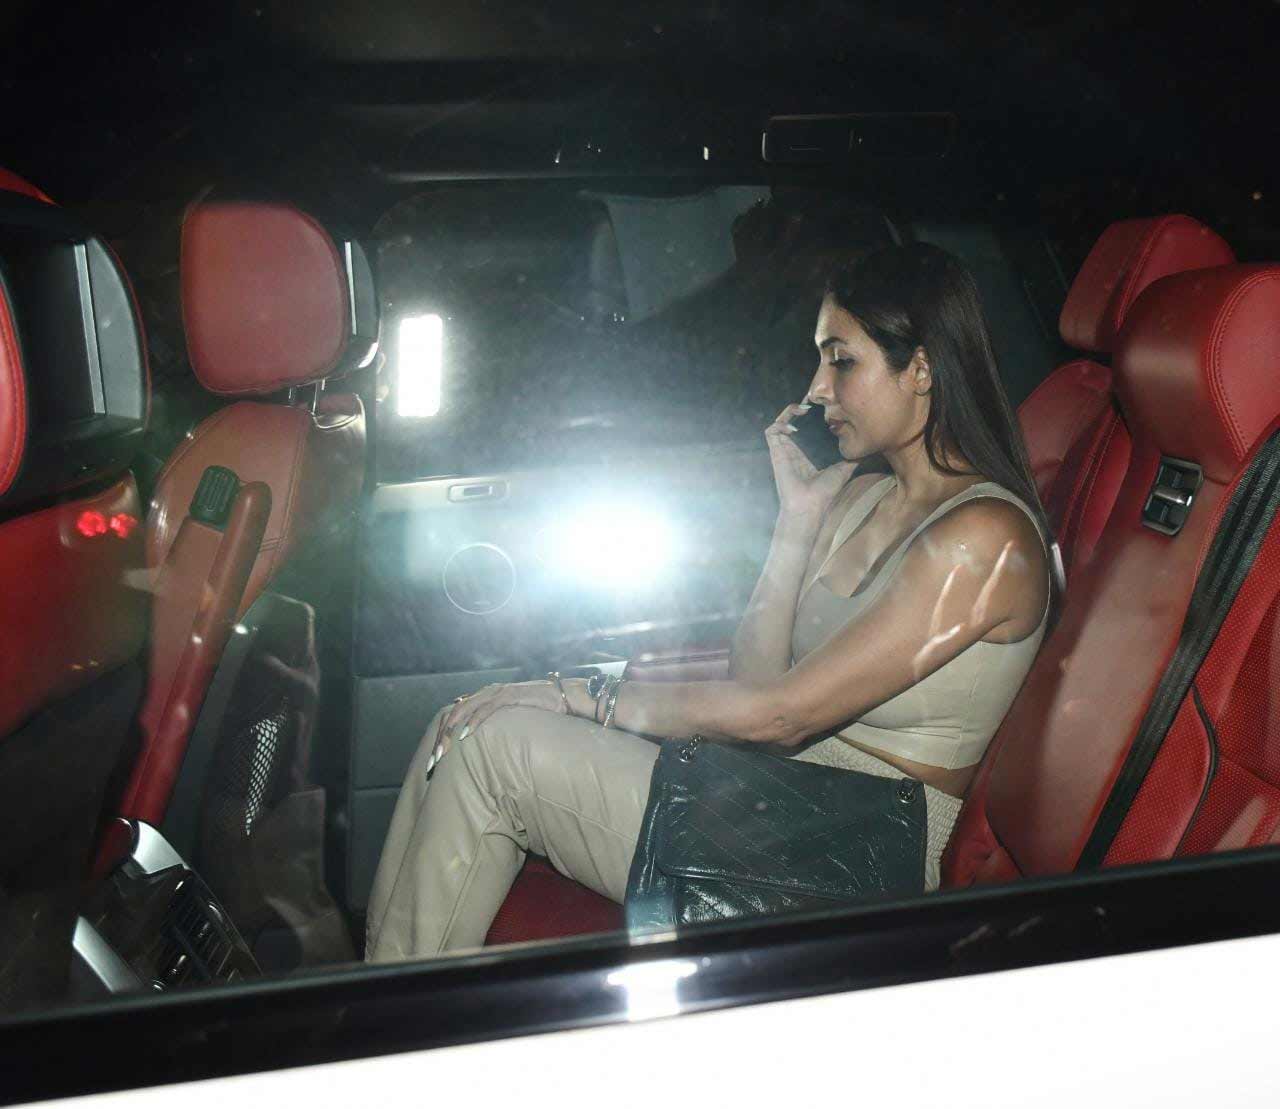 Malaika Arora was also a part of the dinner party. The fitness diva walked into the celebration alone.